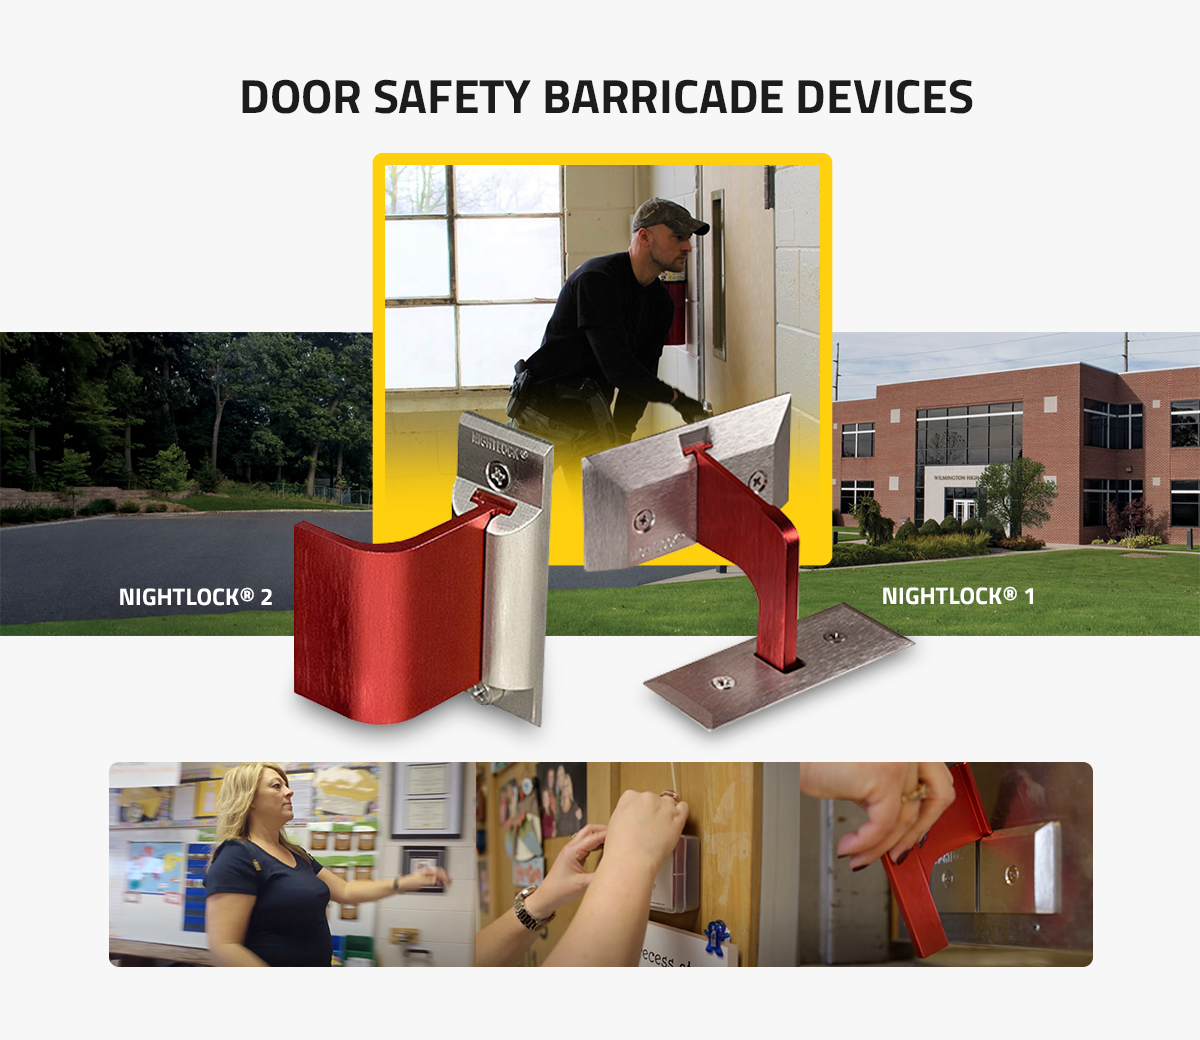 Home Safety Gadgets: Innovative Devices For Protecting Your Home 